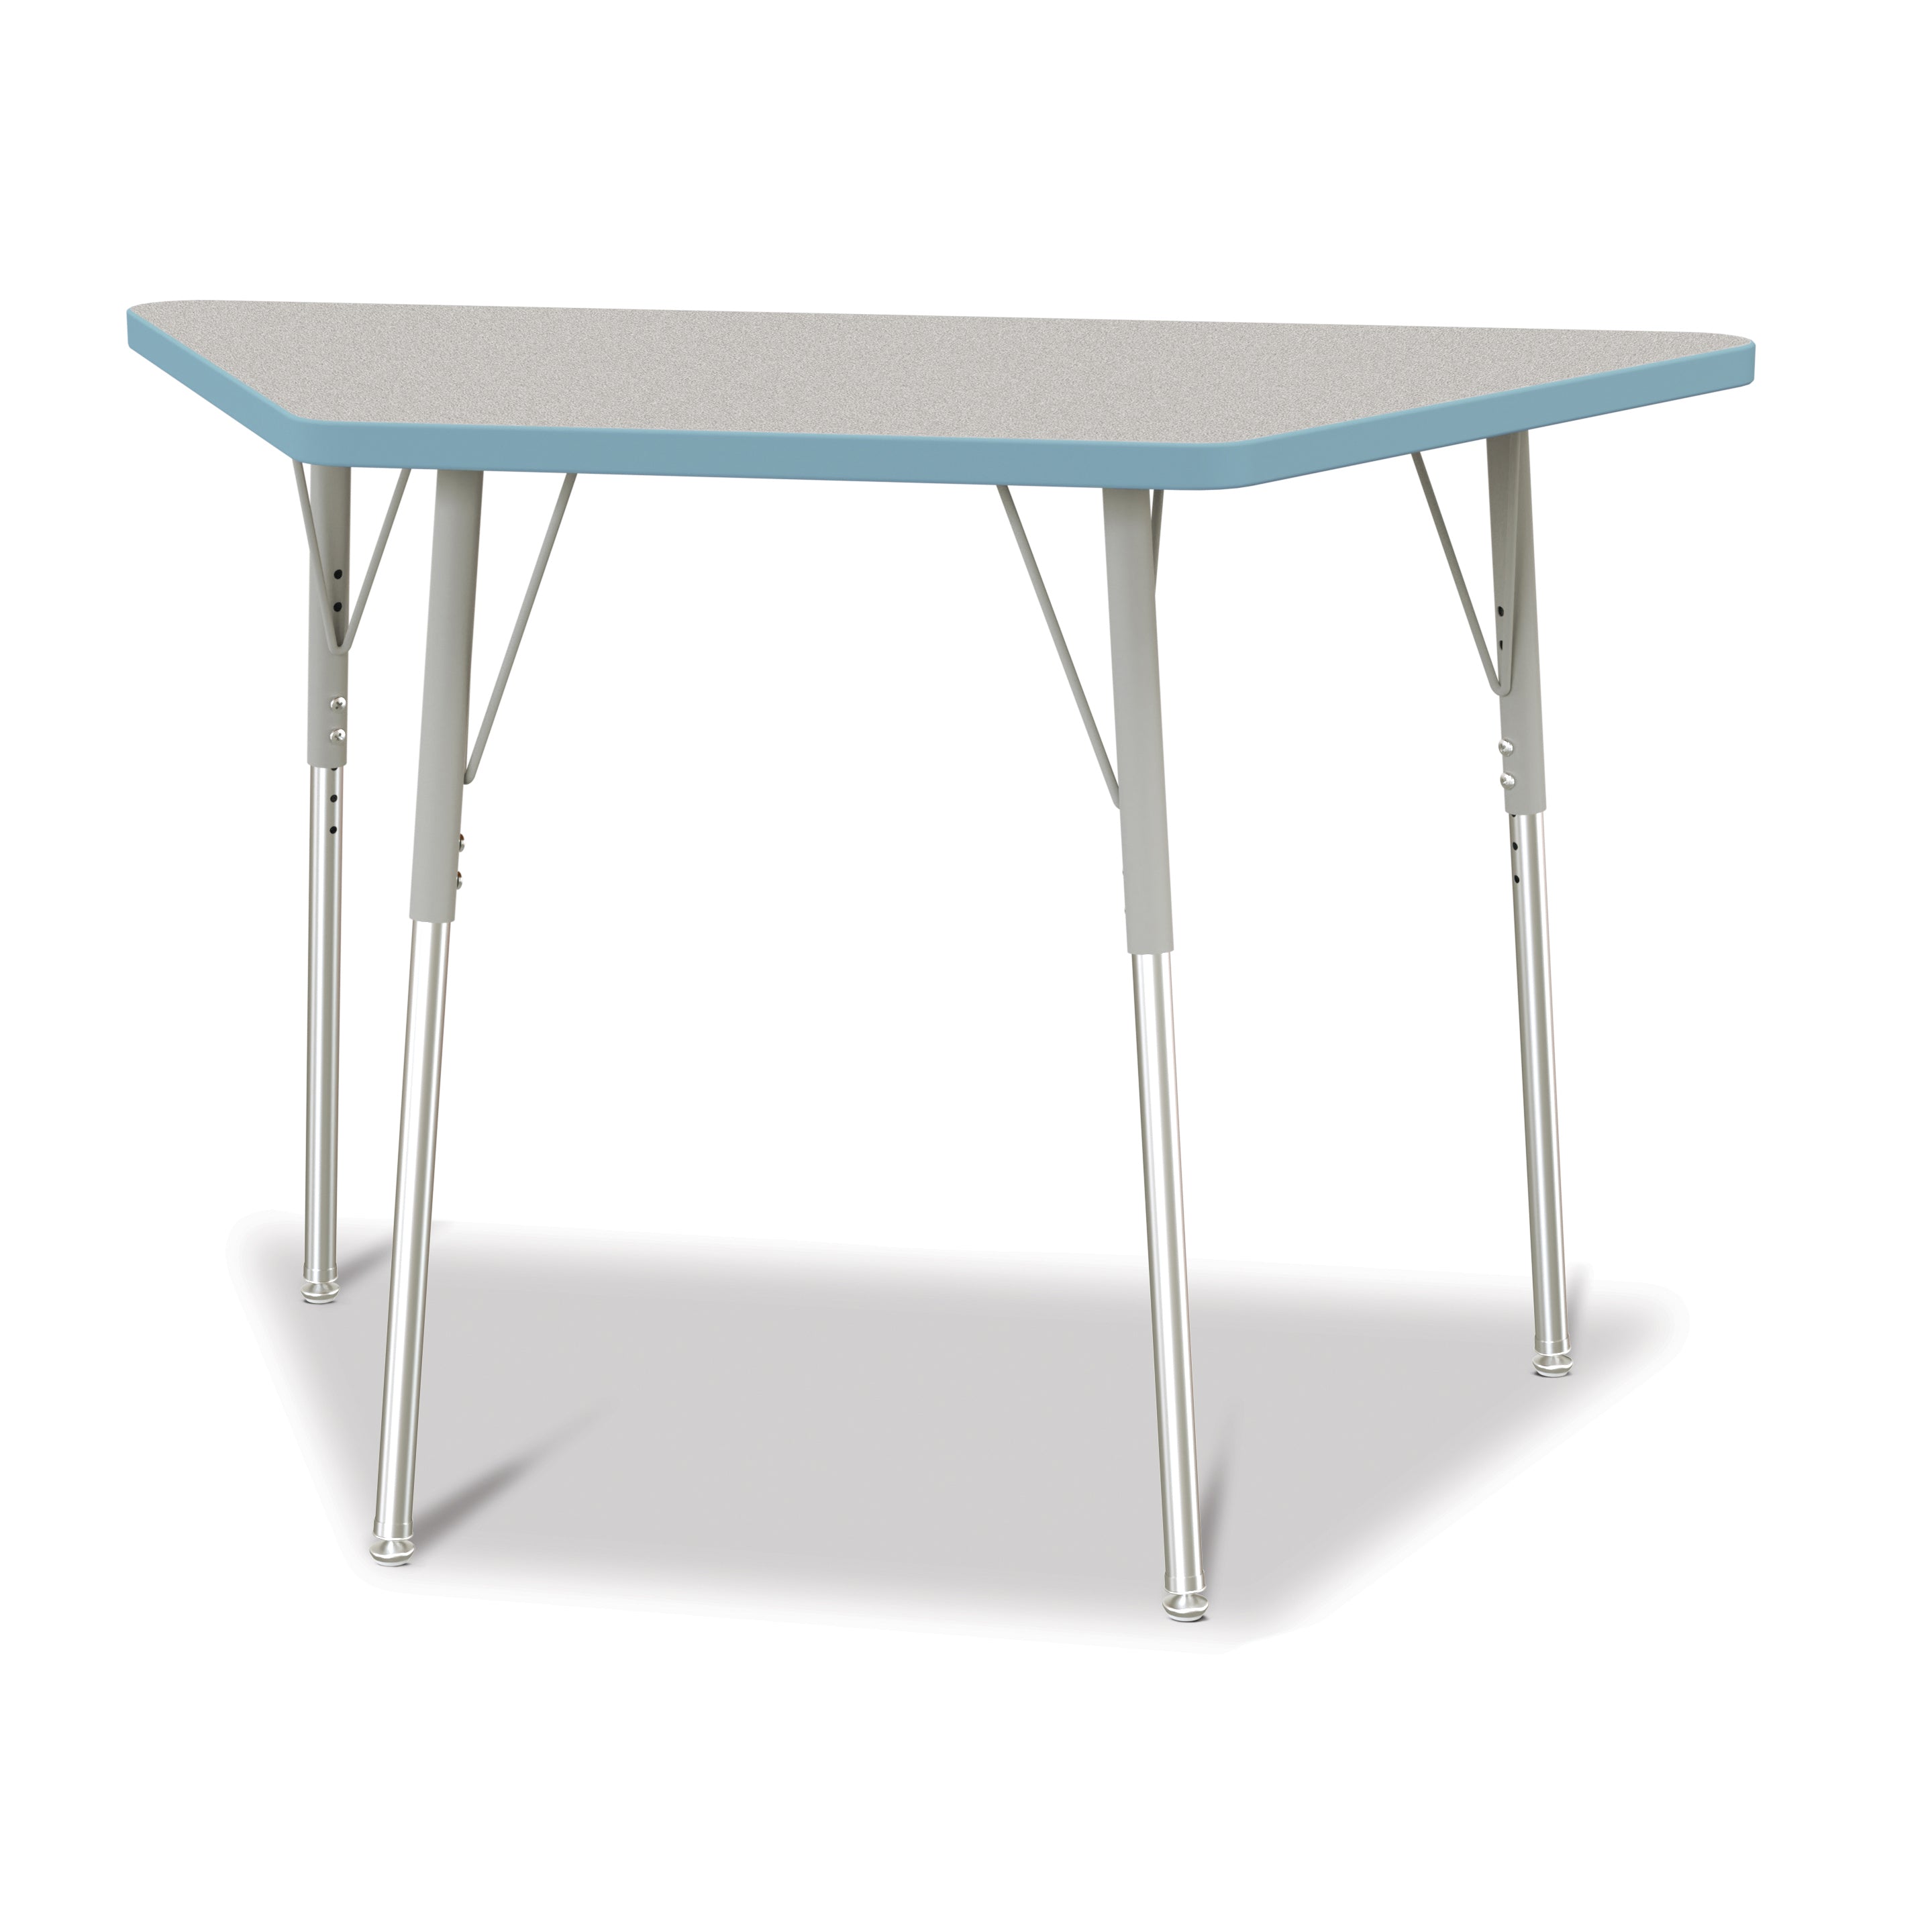 6438JCA131, Berries Trapezoid Activity Tables - 24" X 48", A-height - Freckled Gray/Coastal Blue/Gray